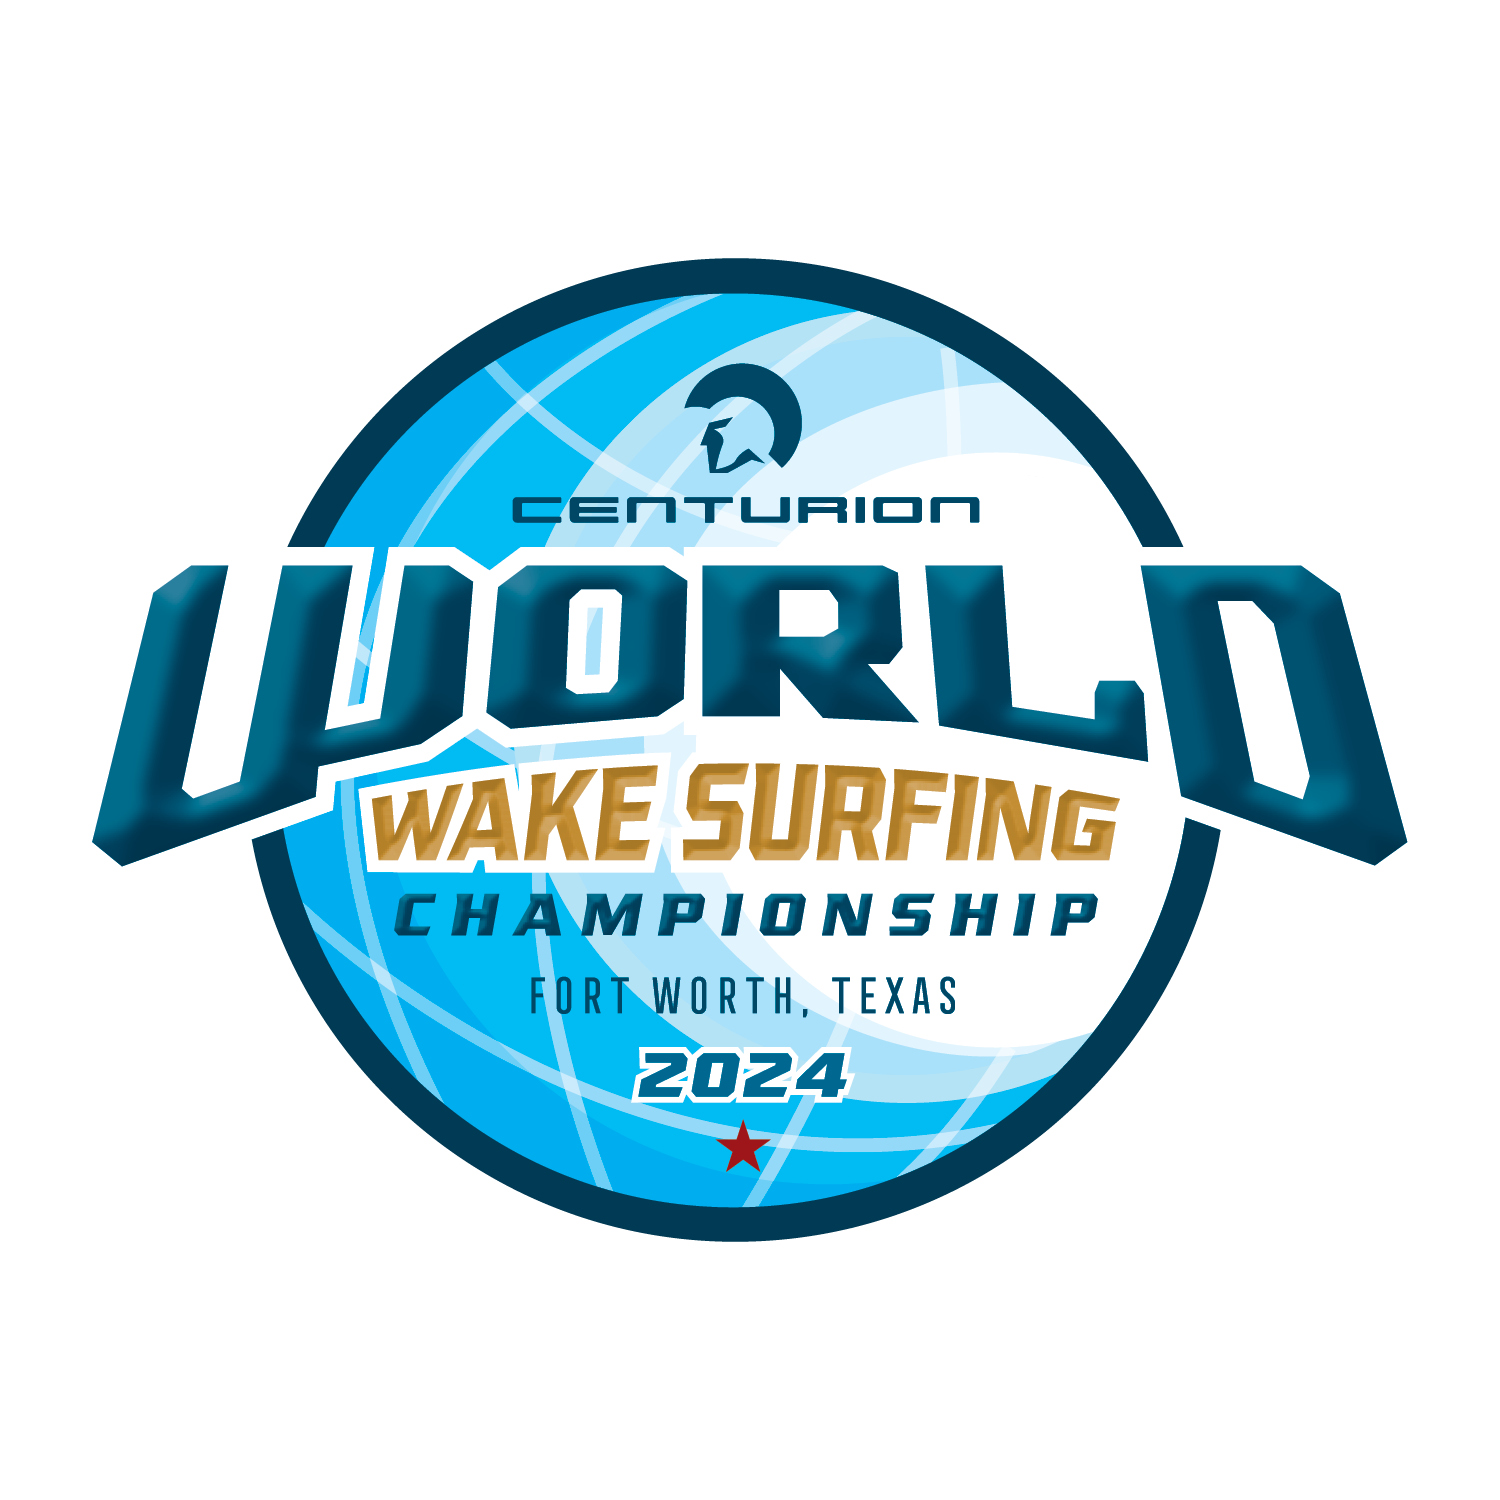 Logo for the 2024 Centurion Worlds Wake Surfing Championship in Fort Worth, Texas, featuring bold text and a Spartan helmet icon.